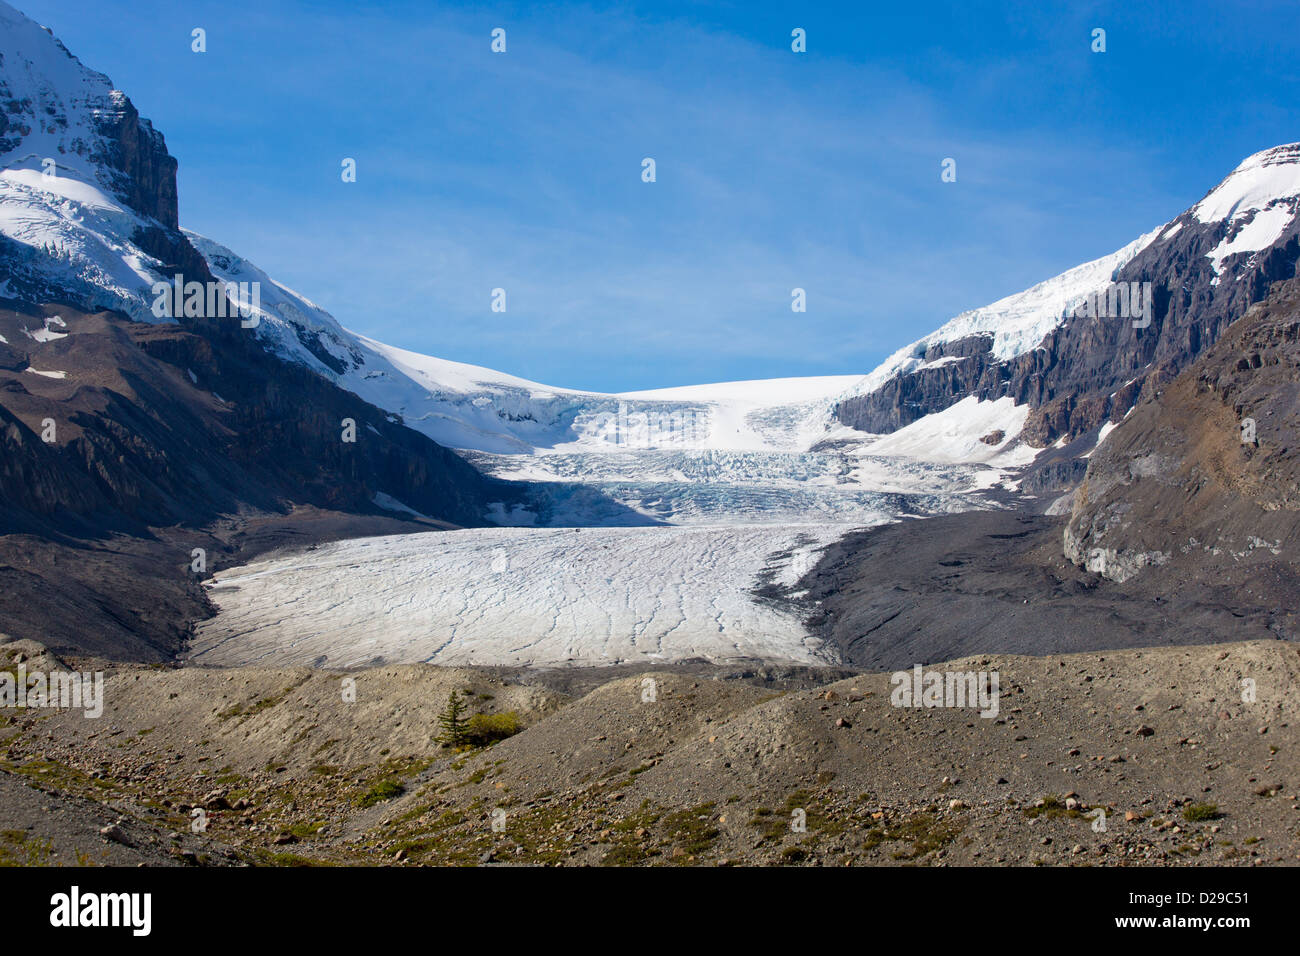 Athebasca Glacier part of the Columbia Icefield along the Icefields Parkway in Jasper National Park in Alberta Canada Stock Photo